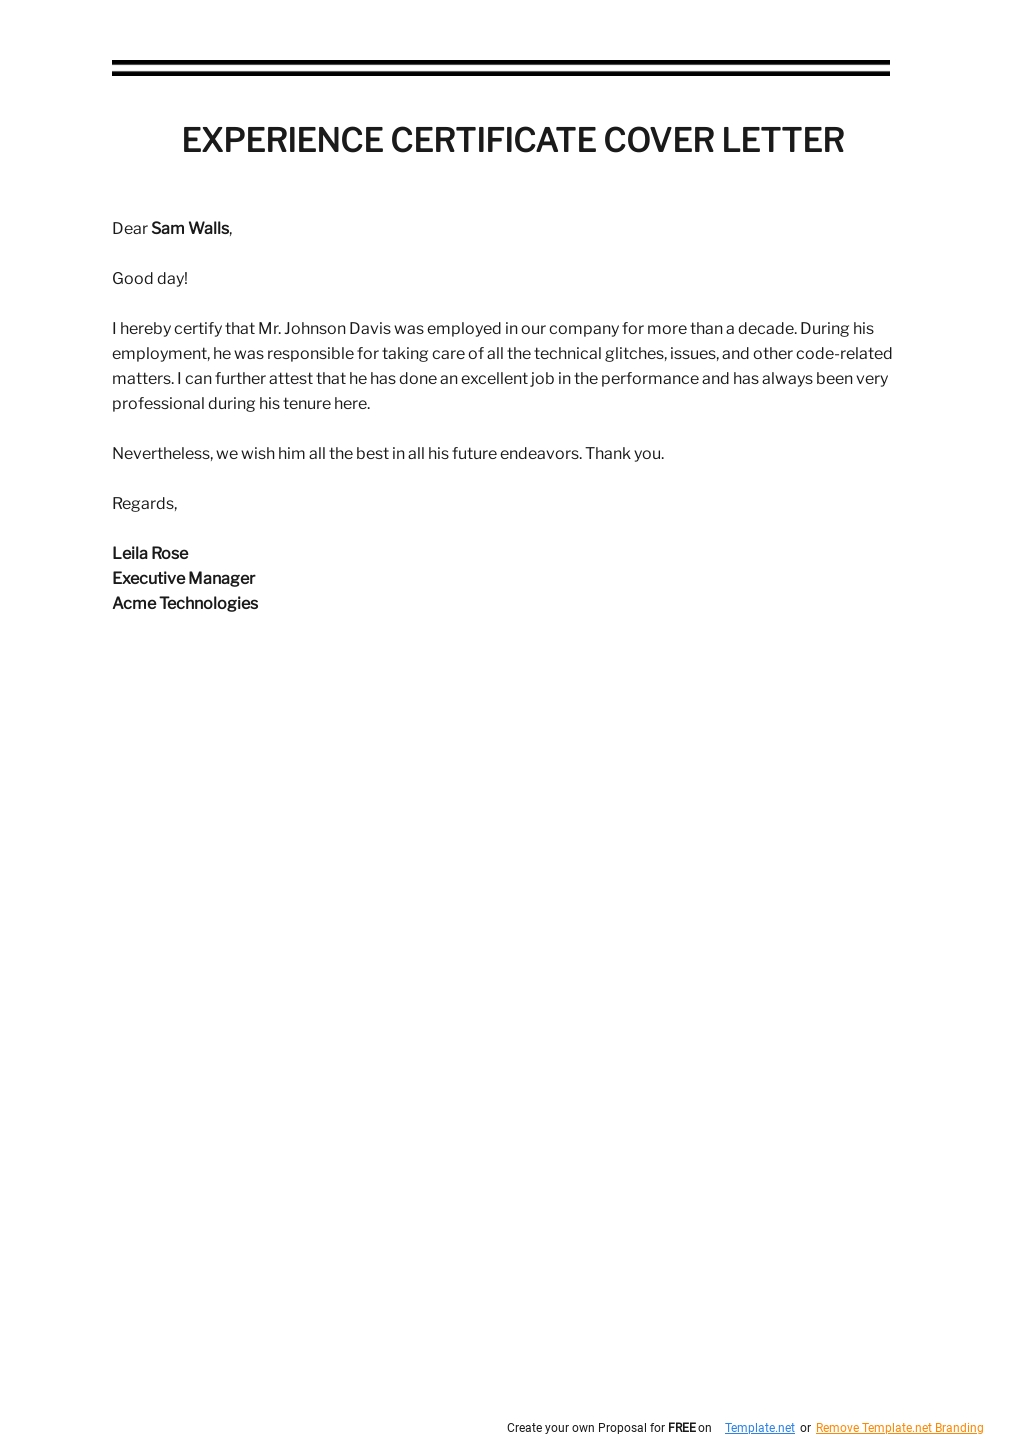 Experience Certificate Letter Template - Google Docs, Word